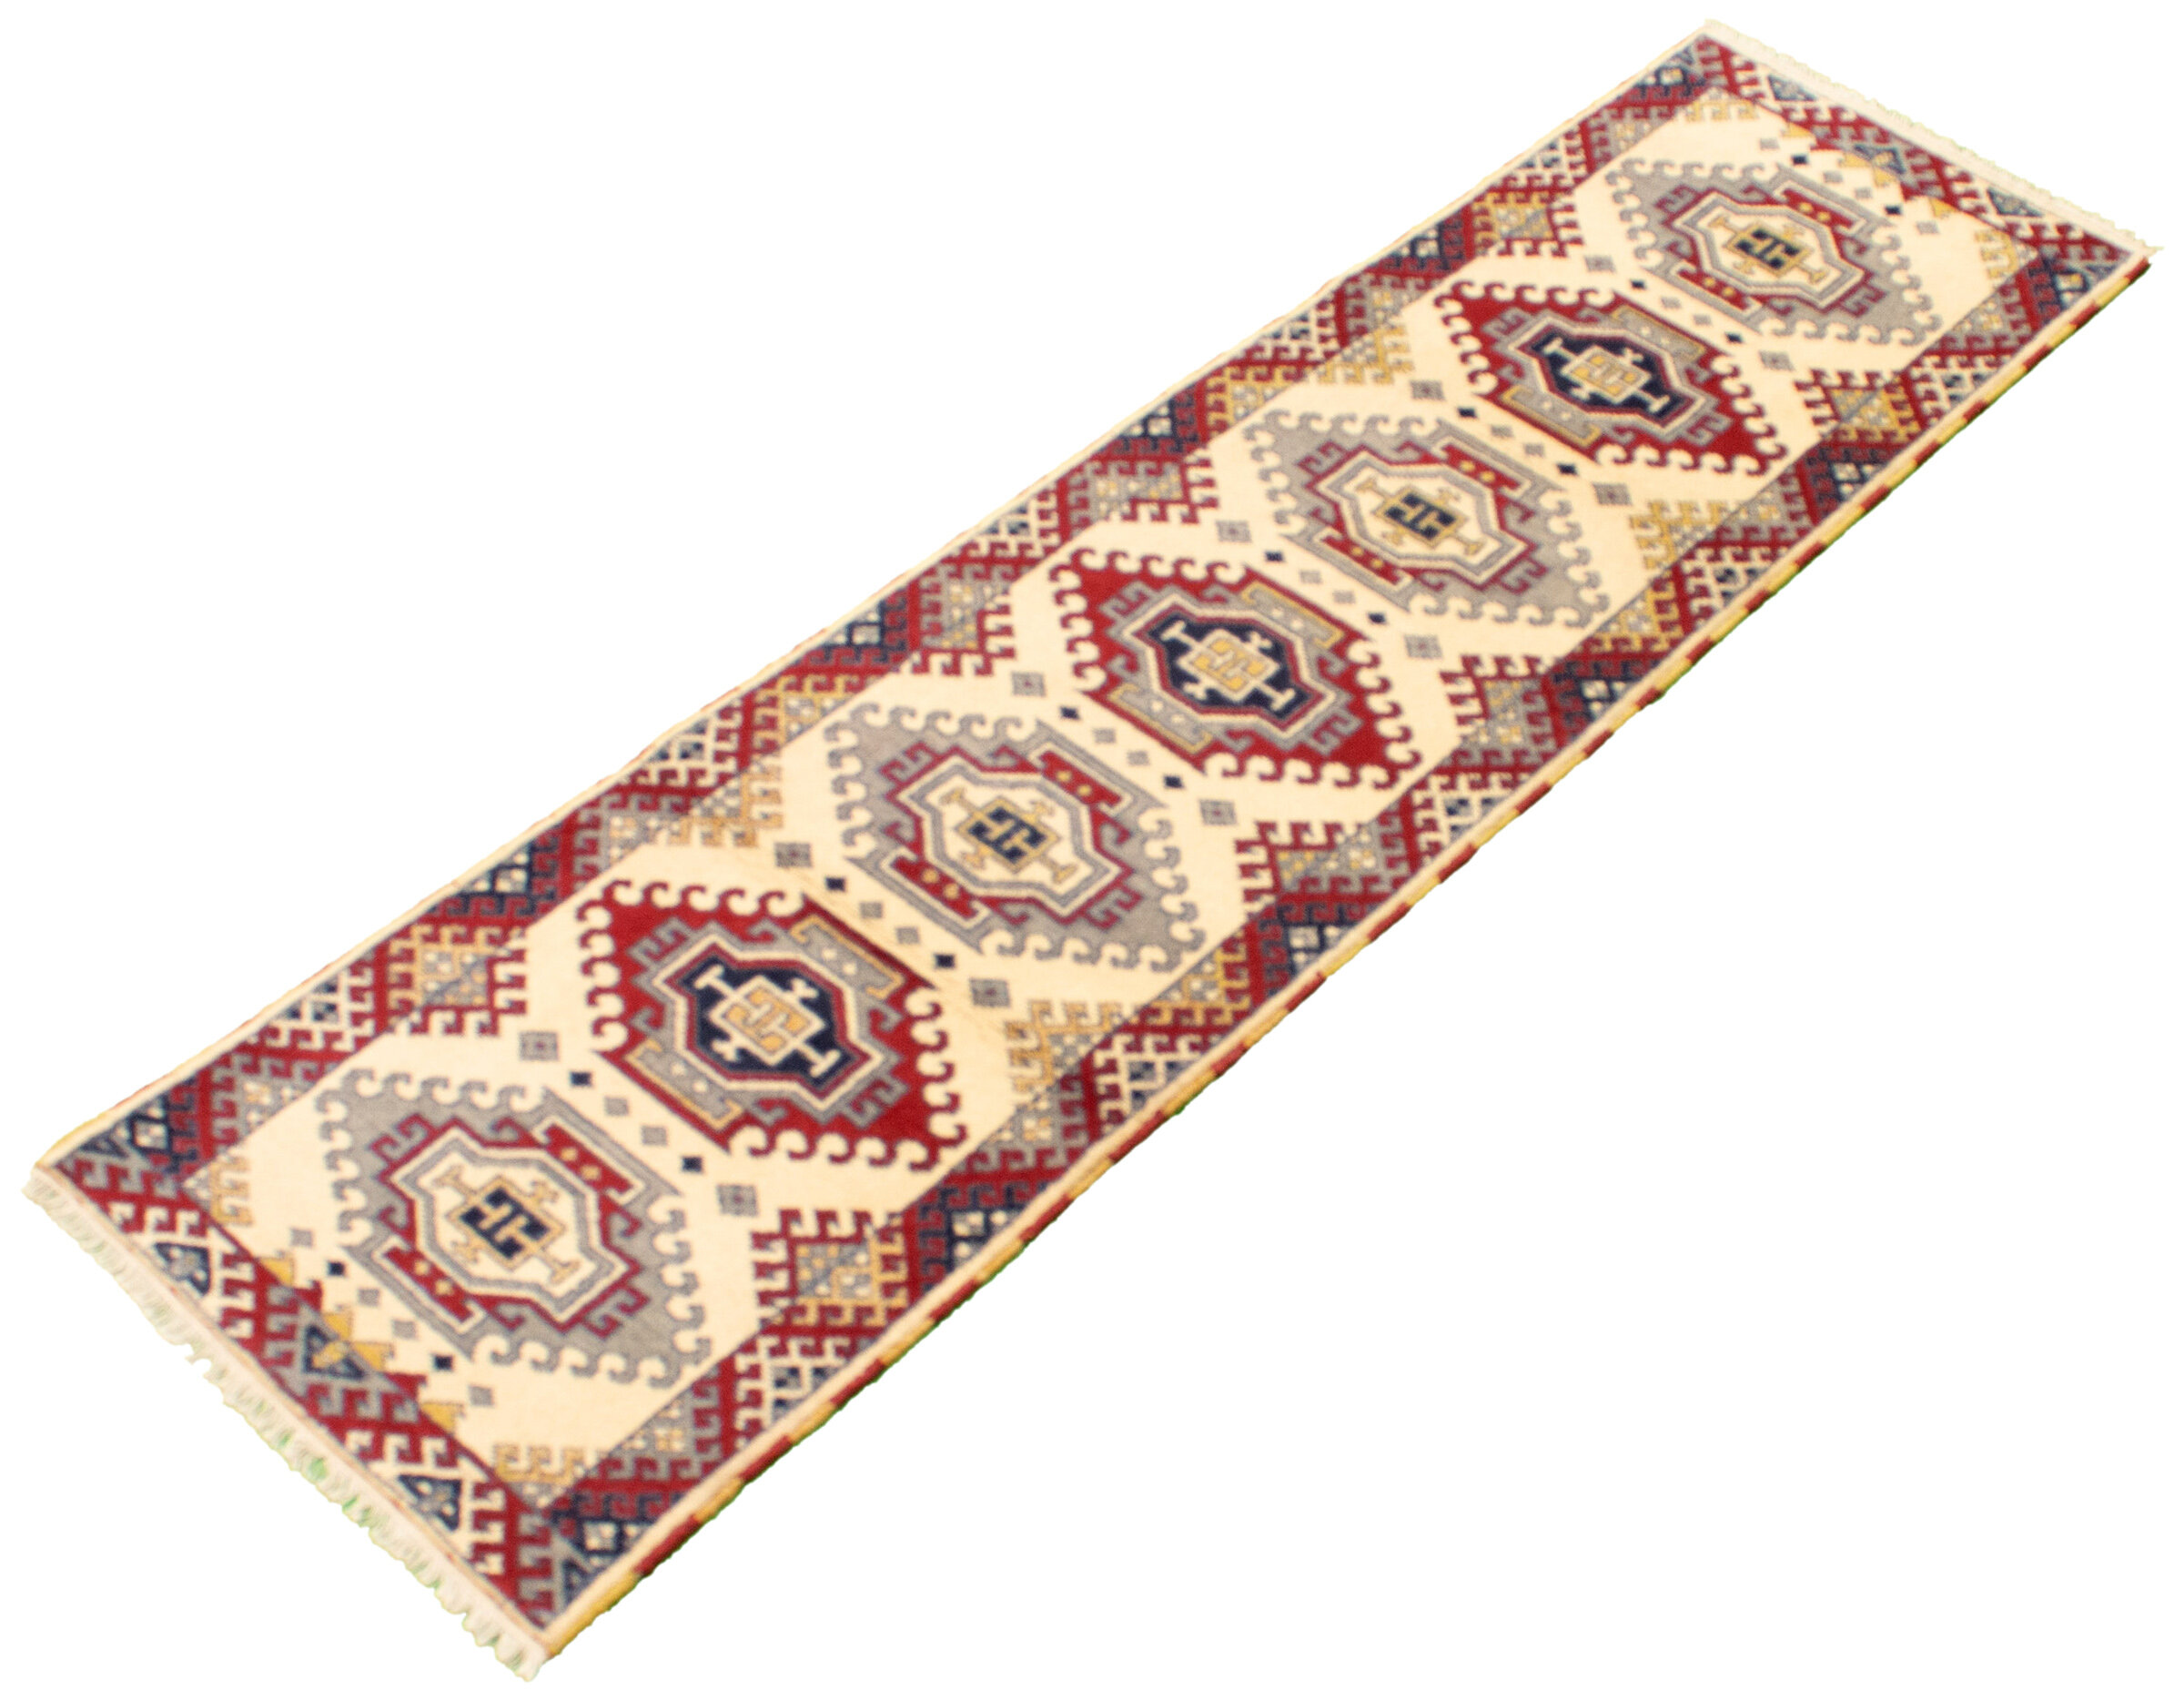 Wool Enertia Carpet Padding Sold in full rolls dimensions: 6' wide by 37.5'  long - 25 sq yds